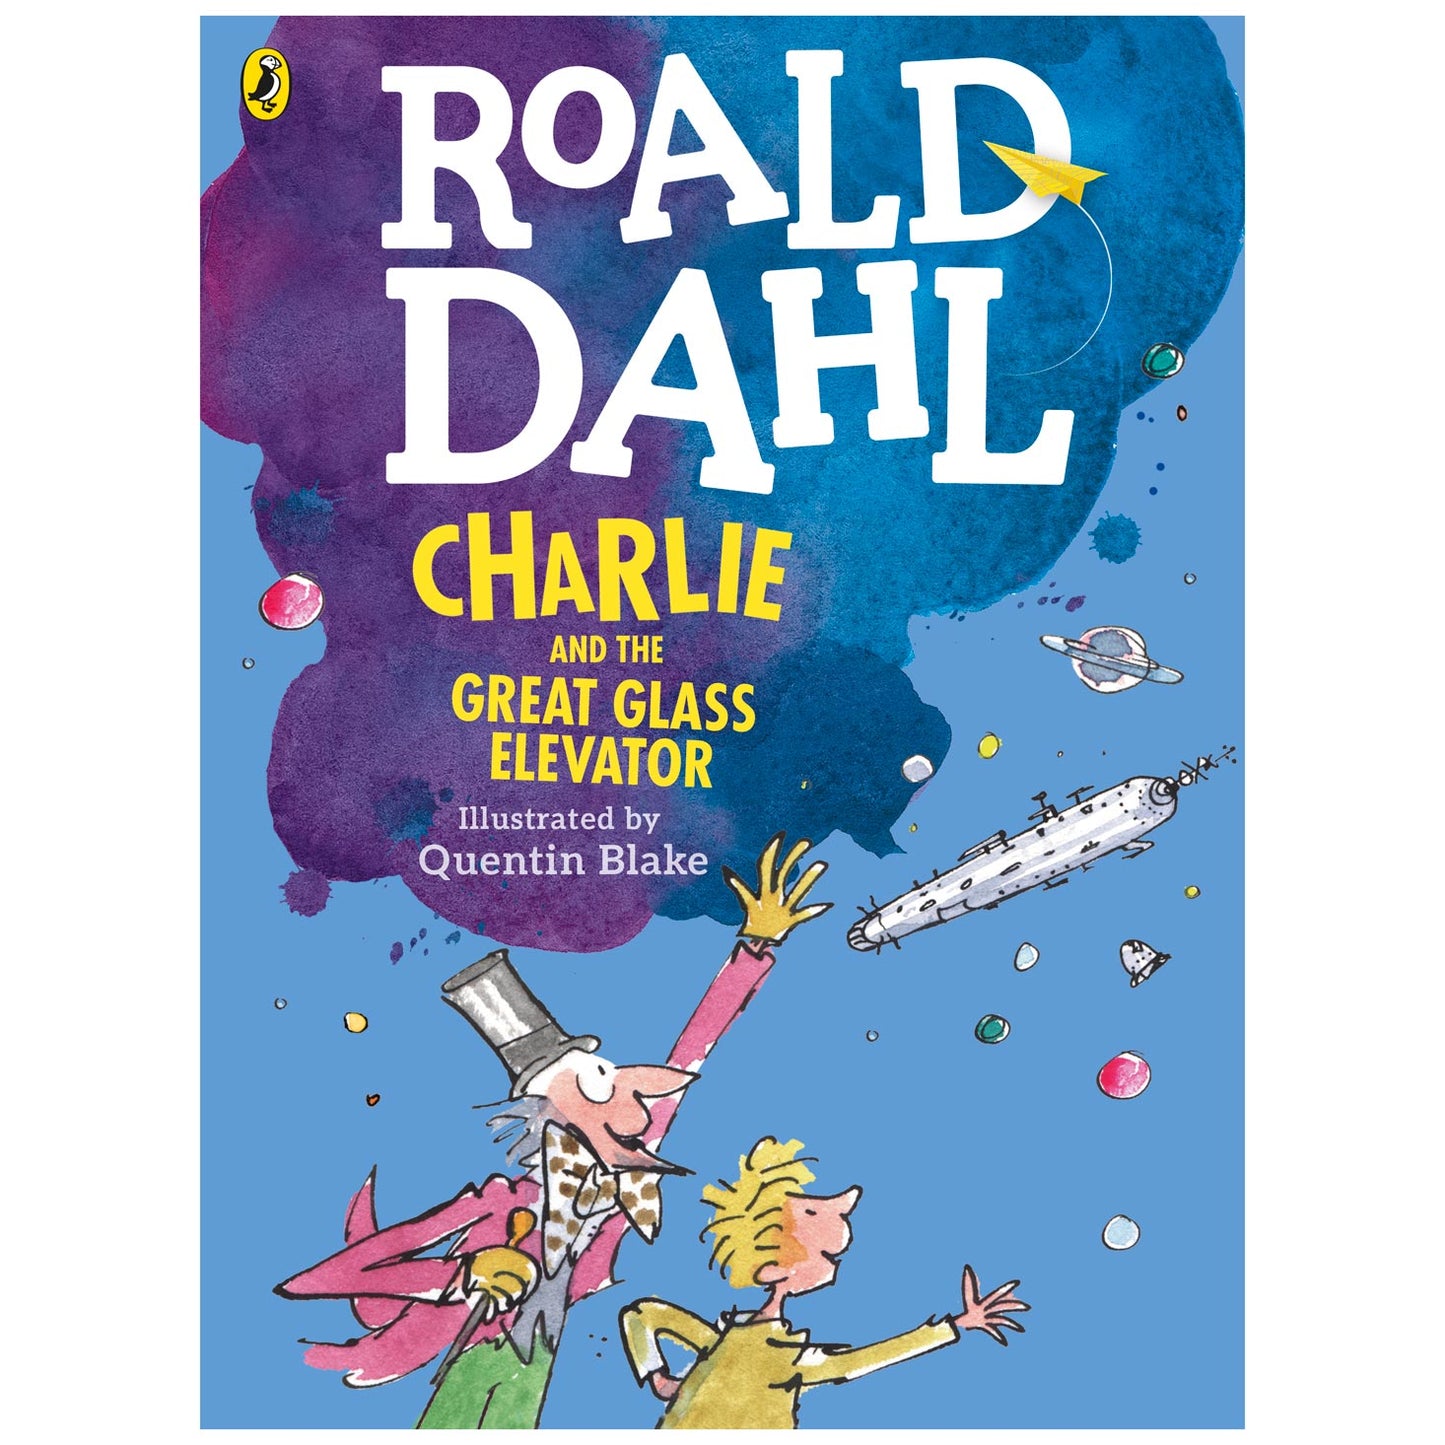 Charlie and the Great Glass Elevator by Roald Dahl with illustrations by Quentin Blake